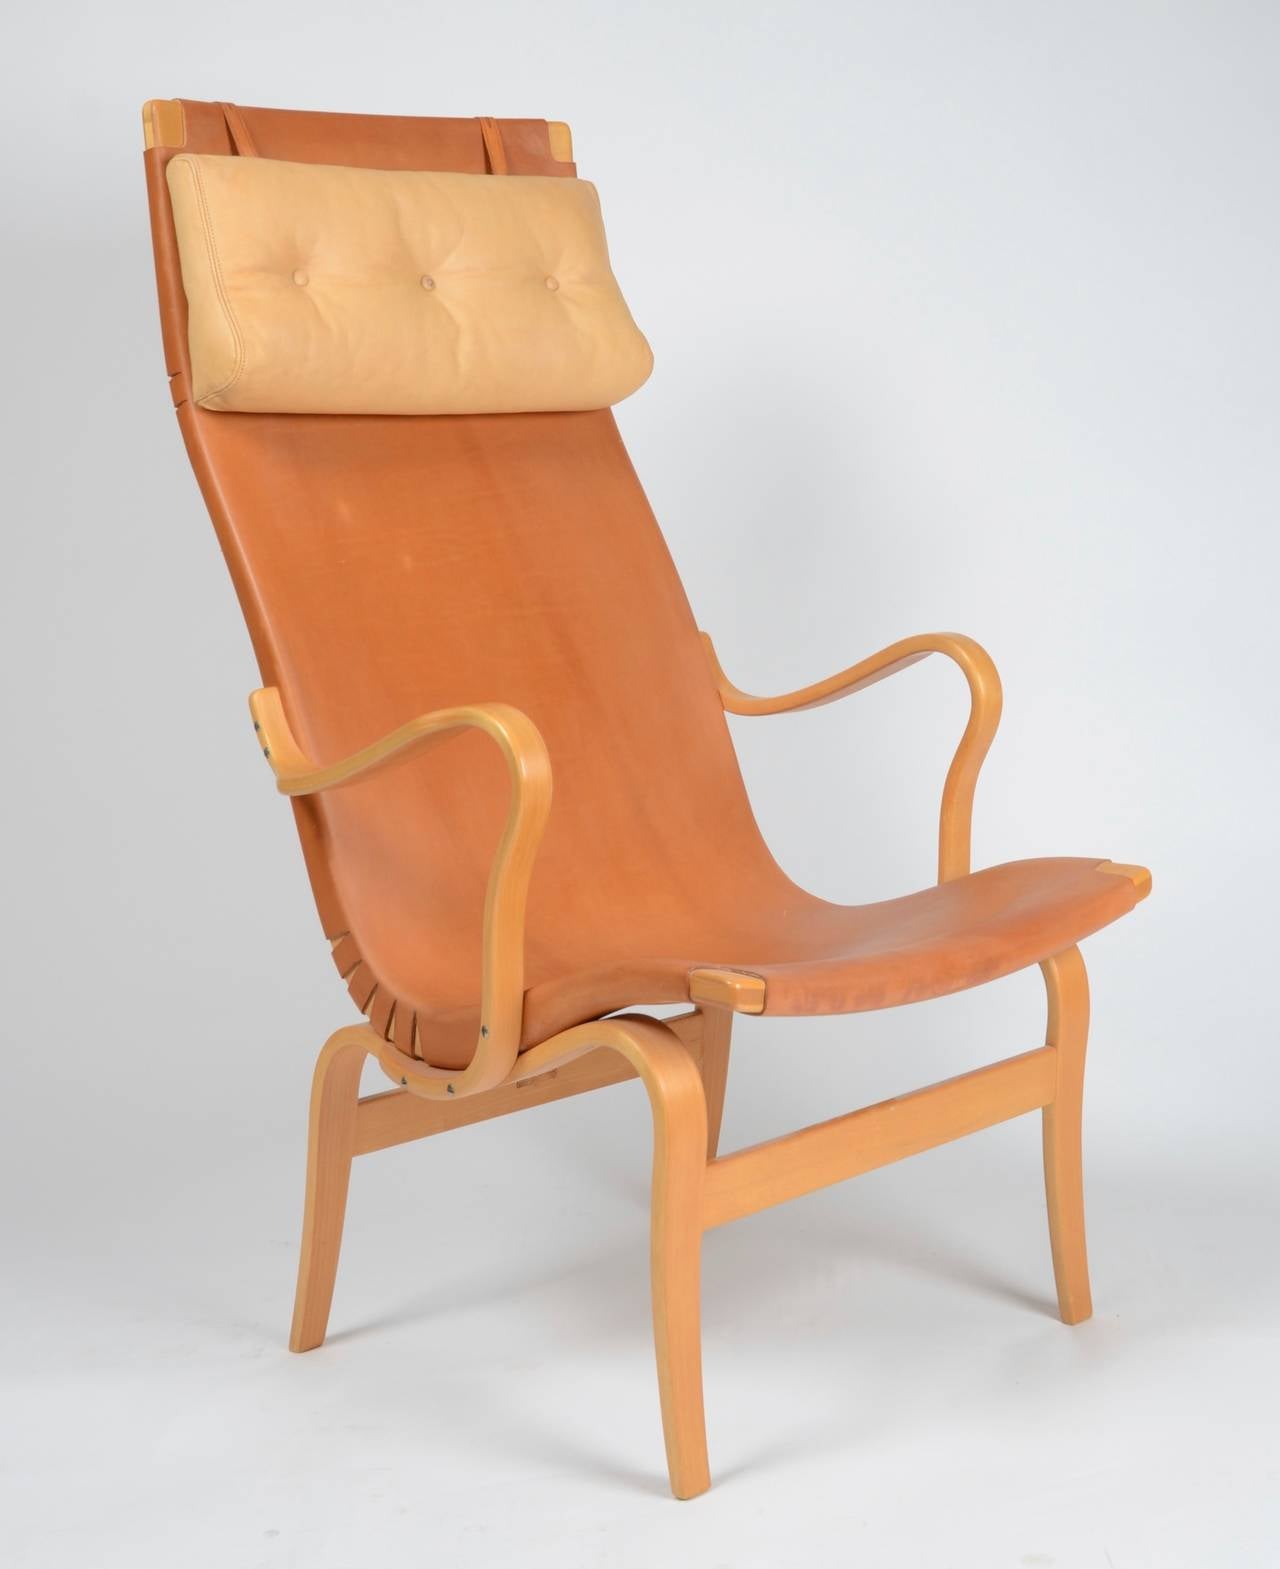 Armchair model high-back Eva with cognac leather, designed by Bruno Mathsson in 1934. Produced by Karl Mathsson, Värnamo Sweden. This example dated 1978.